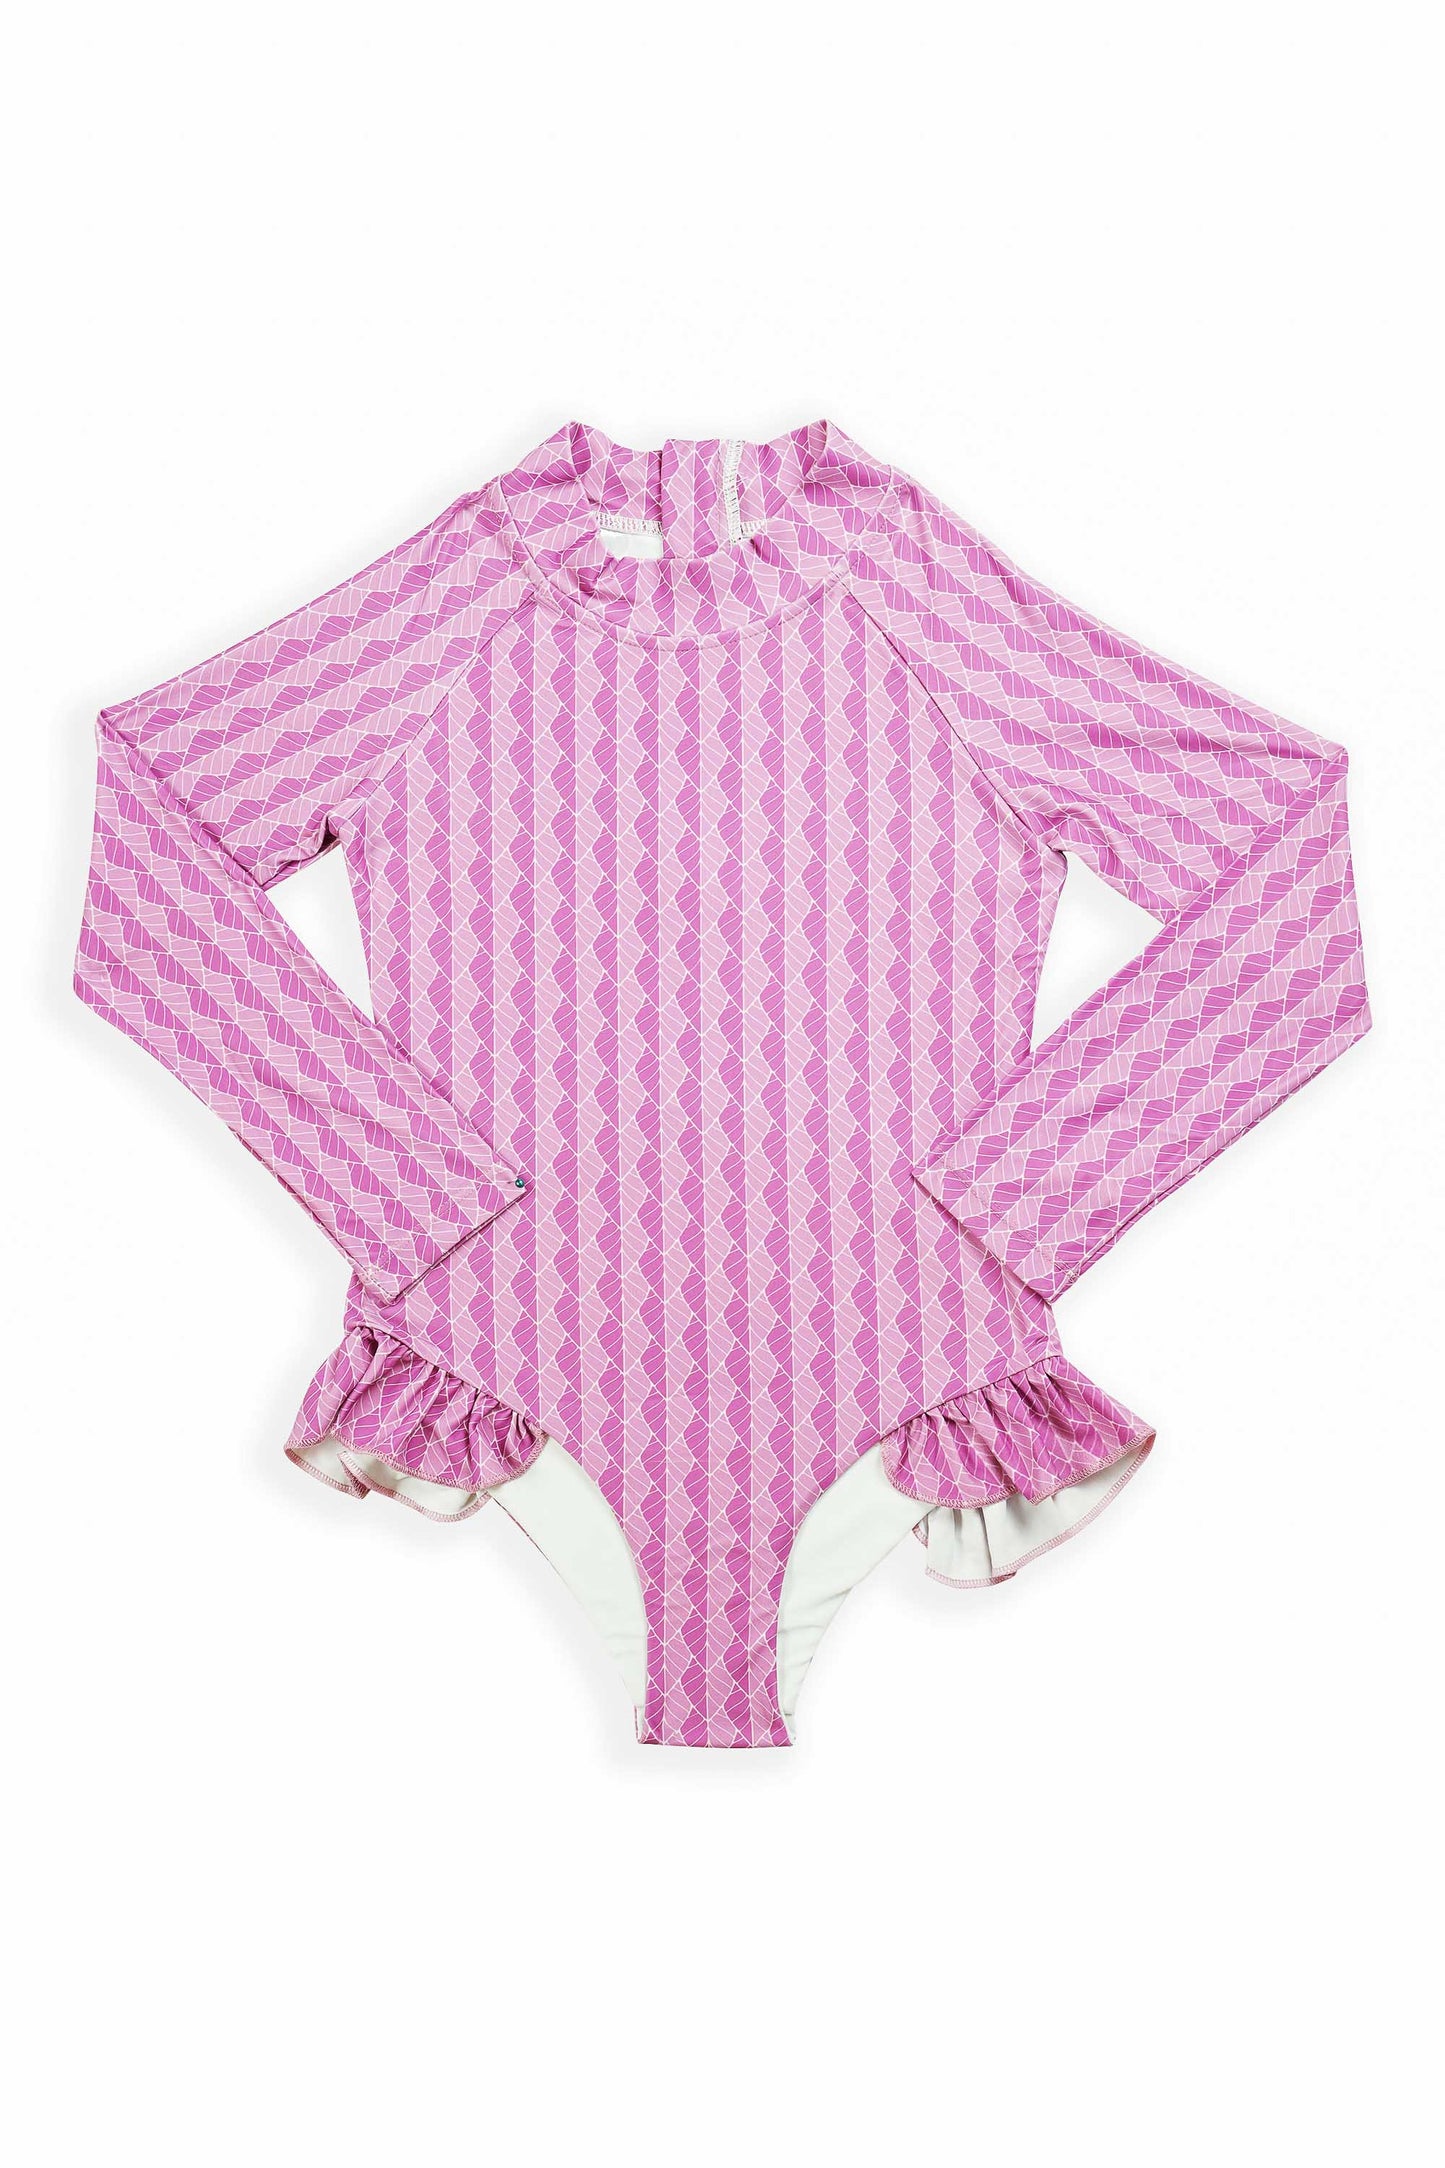 Coral Girls' Long Sleeve Swimsuit